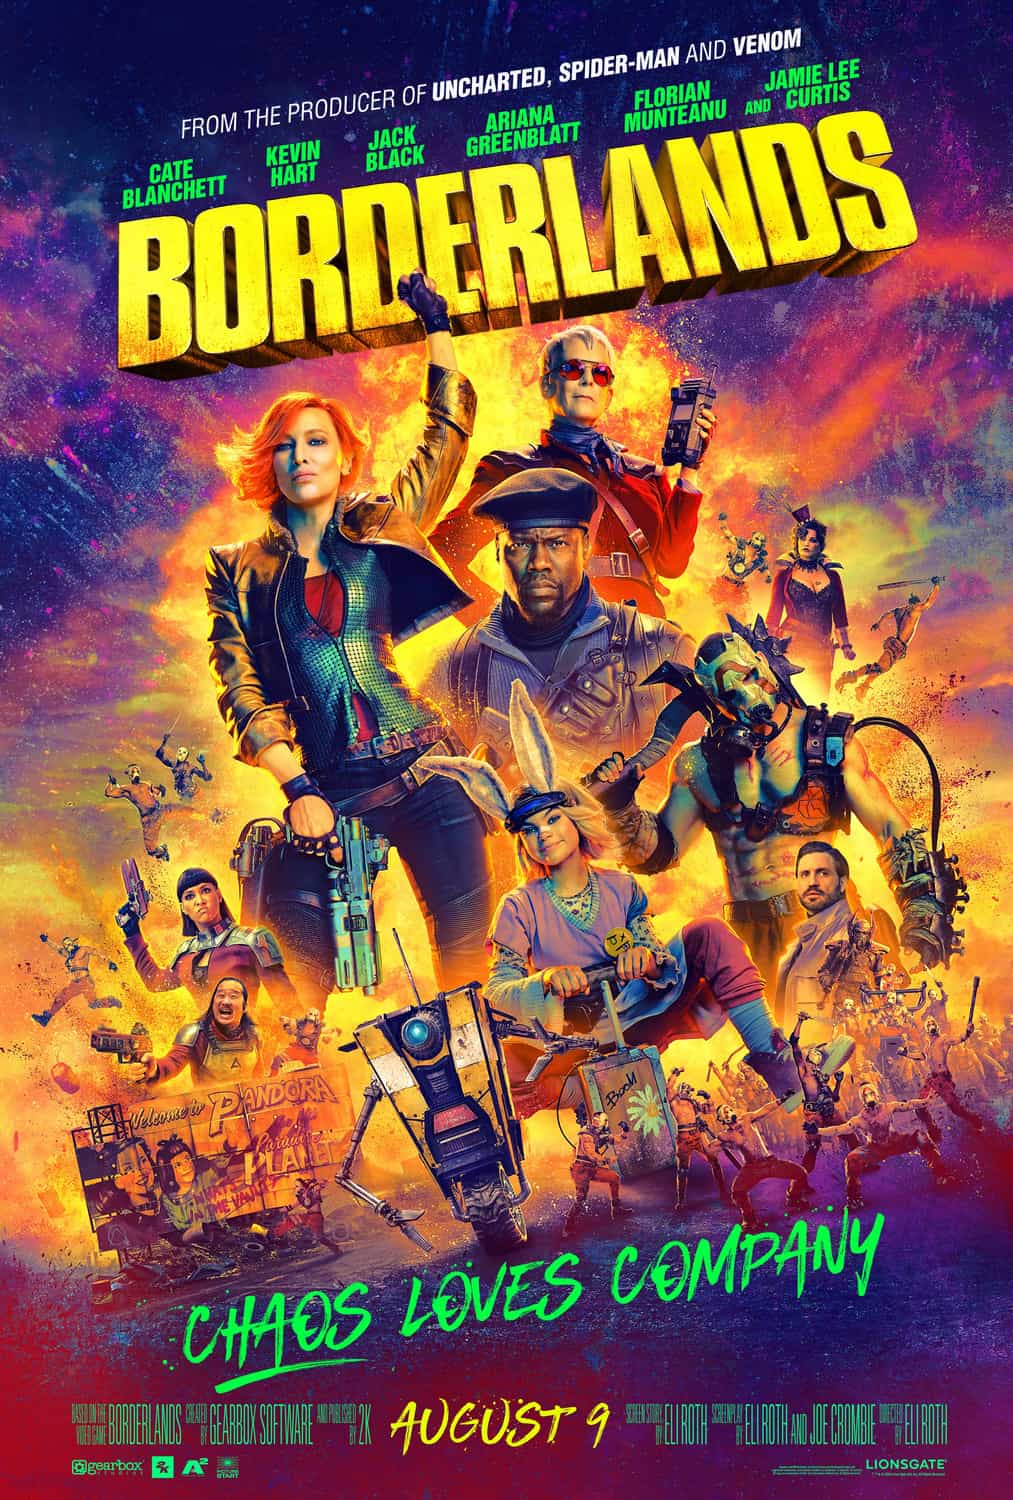 First trailer released for Borderlands which stars Ariana Greenblatt and Jamie Lee Curtis - movie UK release date 9th August 2024 #borderlands